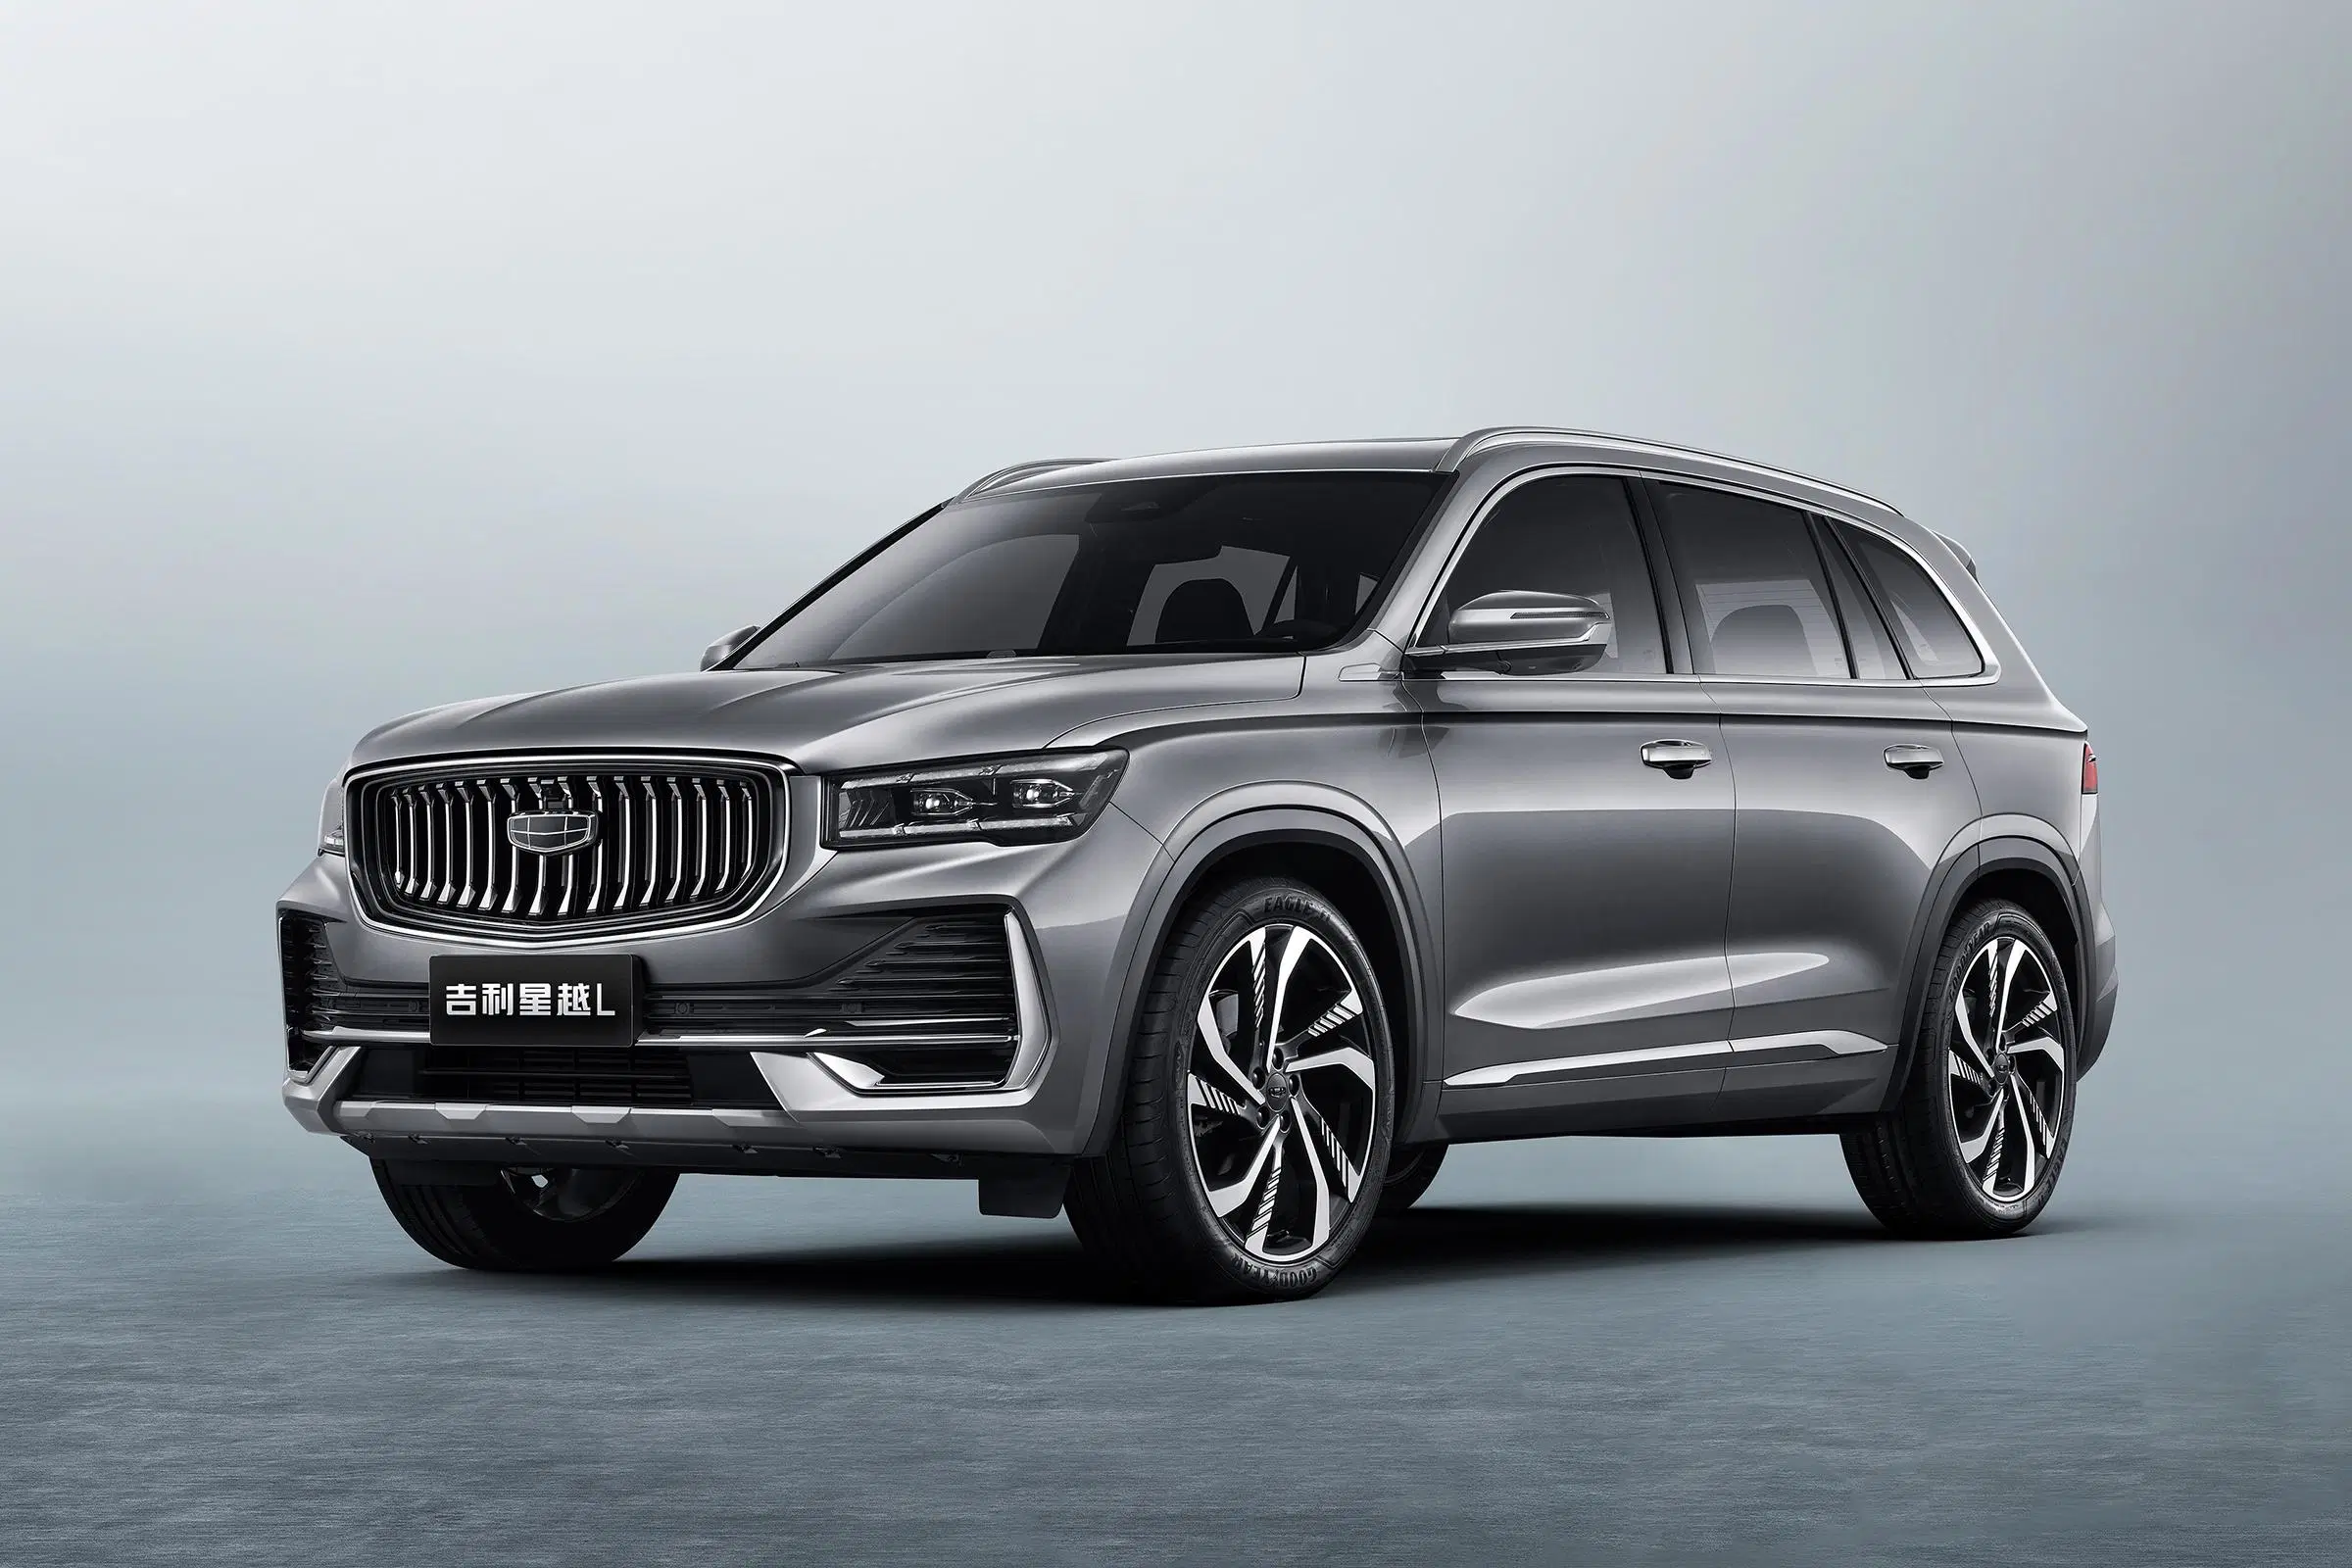 2023 New Geely Xingyue L /Geely Manjaro Flagship Version Guaranteed Quality High Speed 5-Seat SUV 2.0t 2WD/4WD New Car